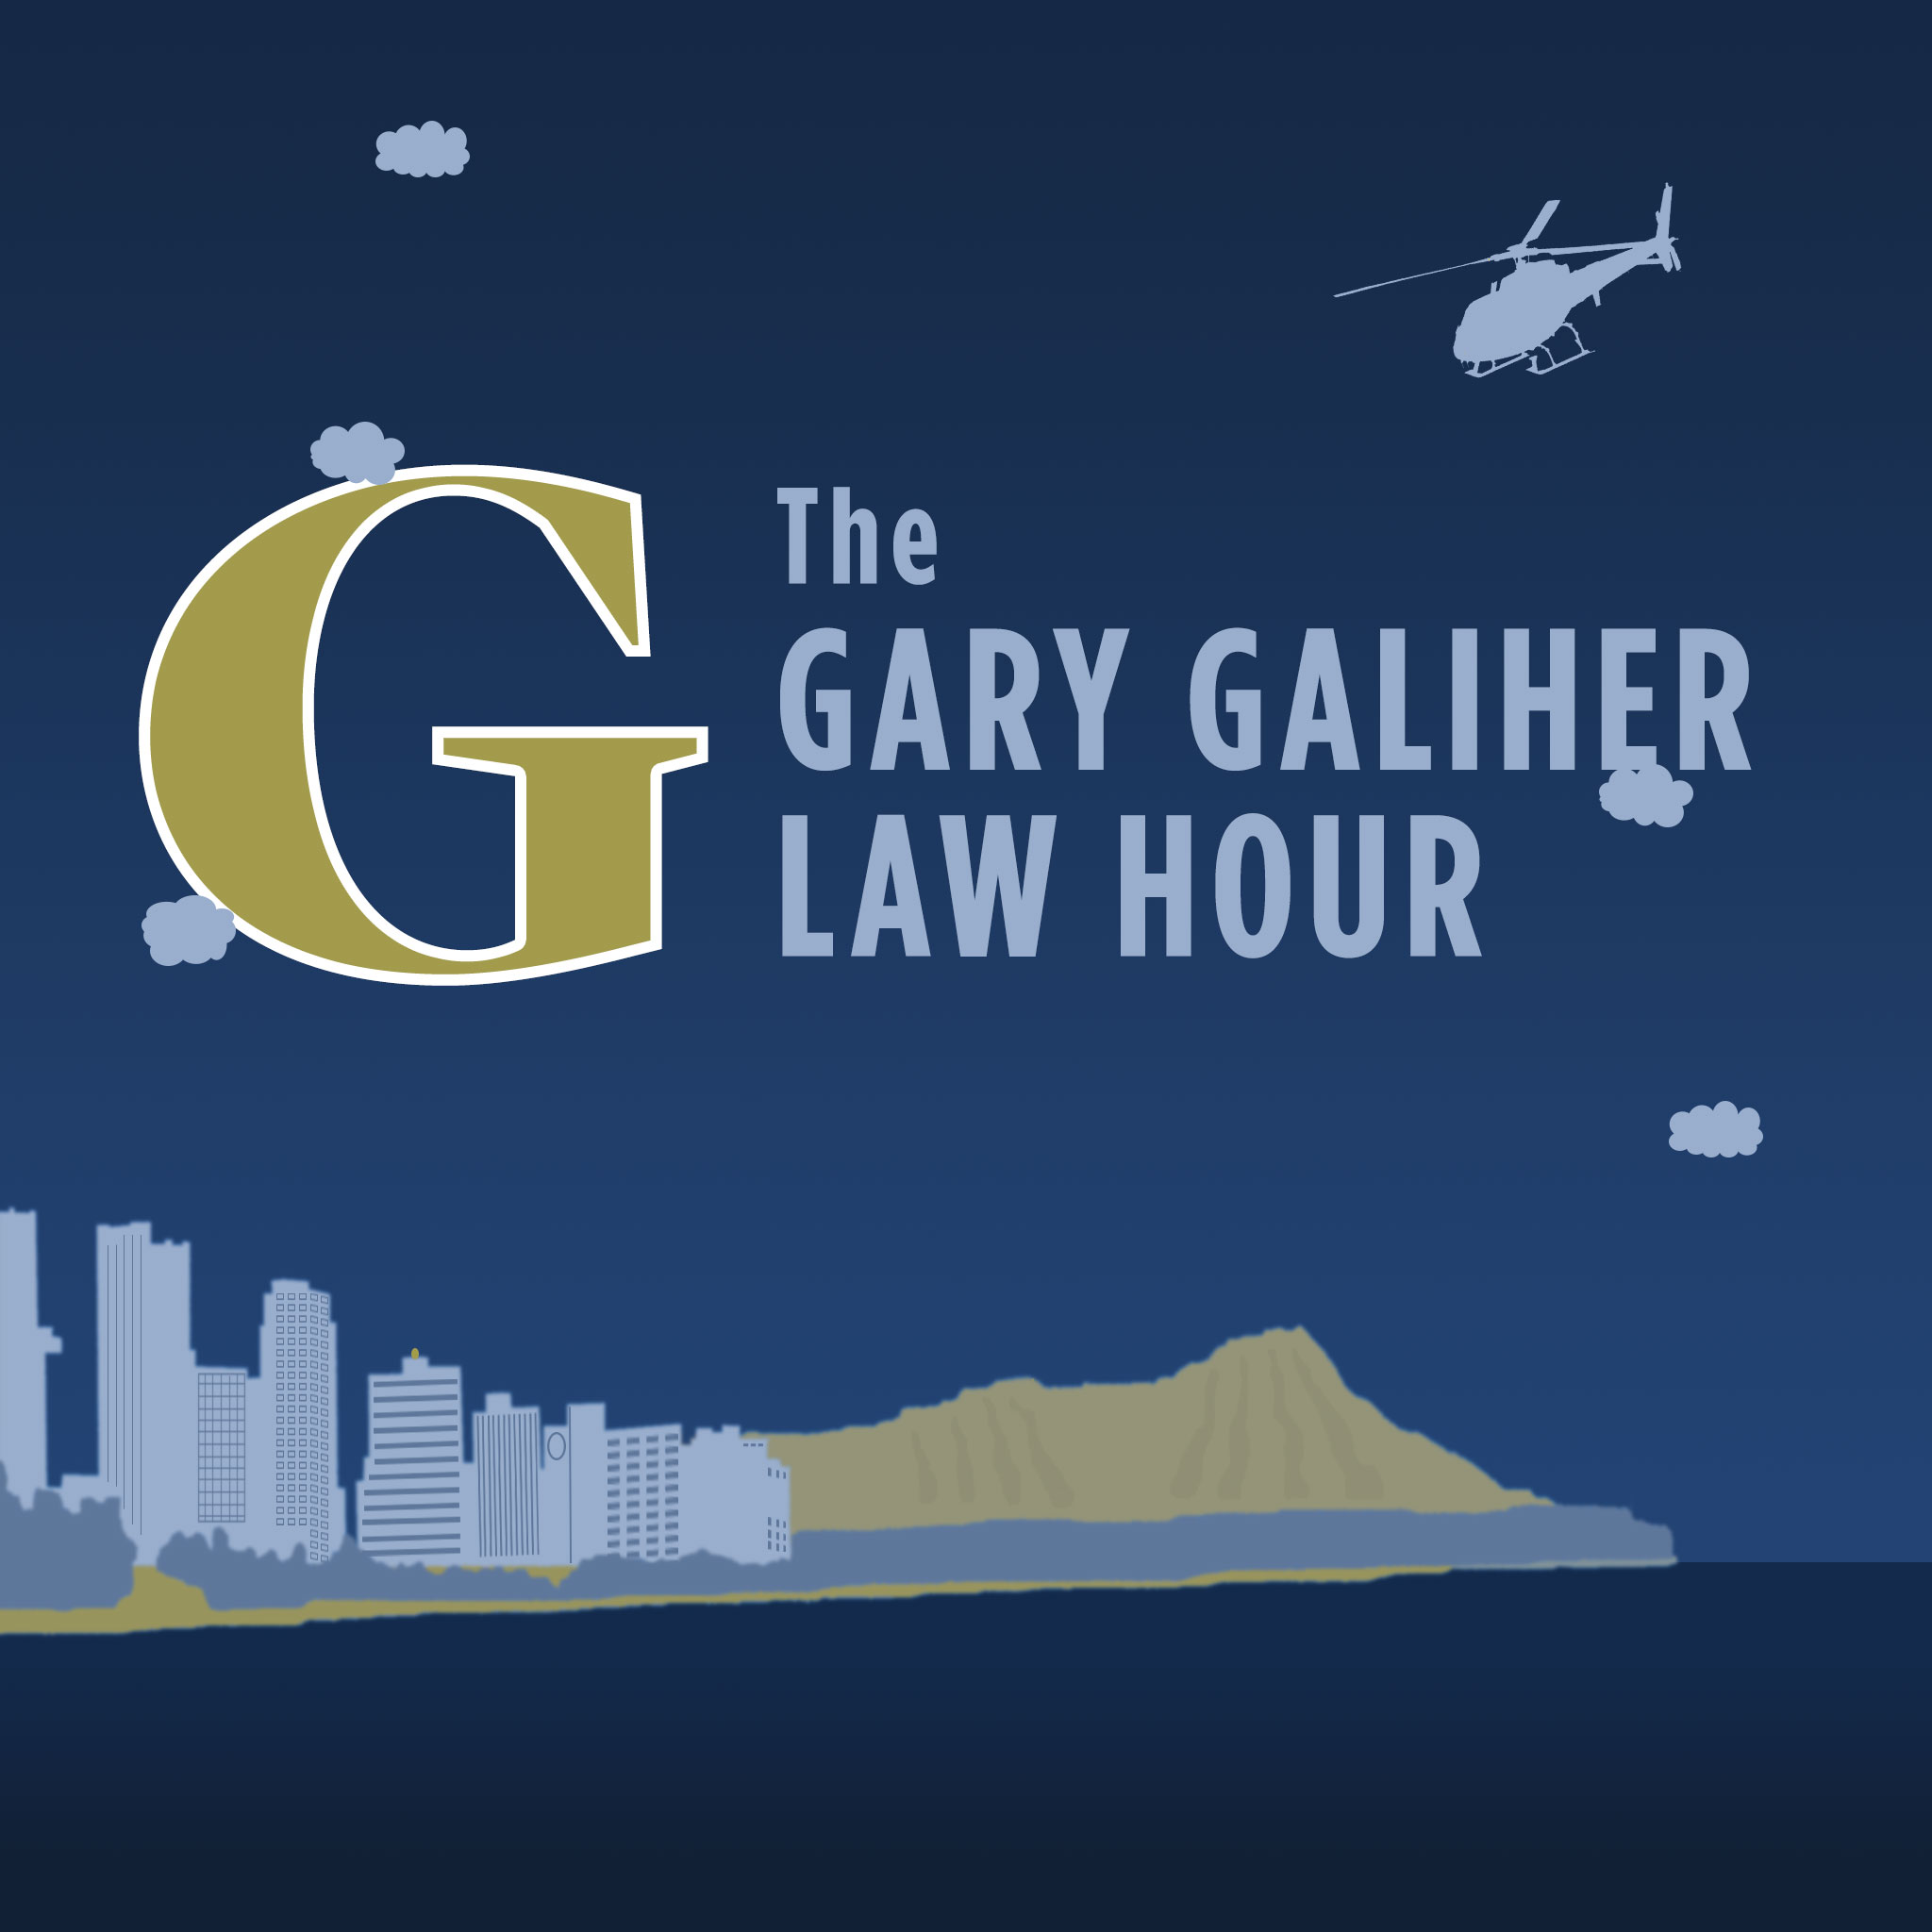 The Gary Galiher Law Hour — Episode 3: Concussion Safety w/ Dr. Nathan Murata